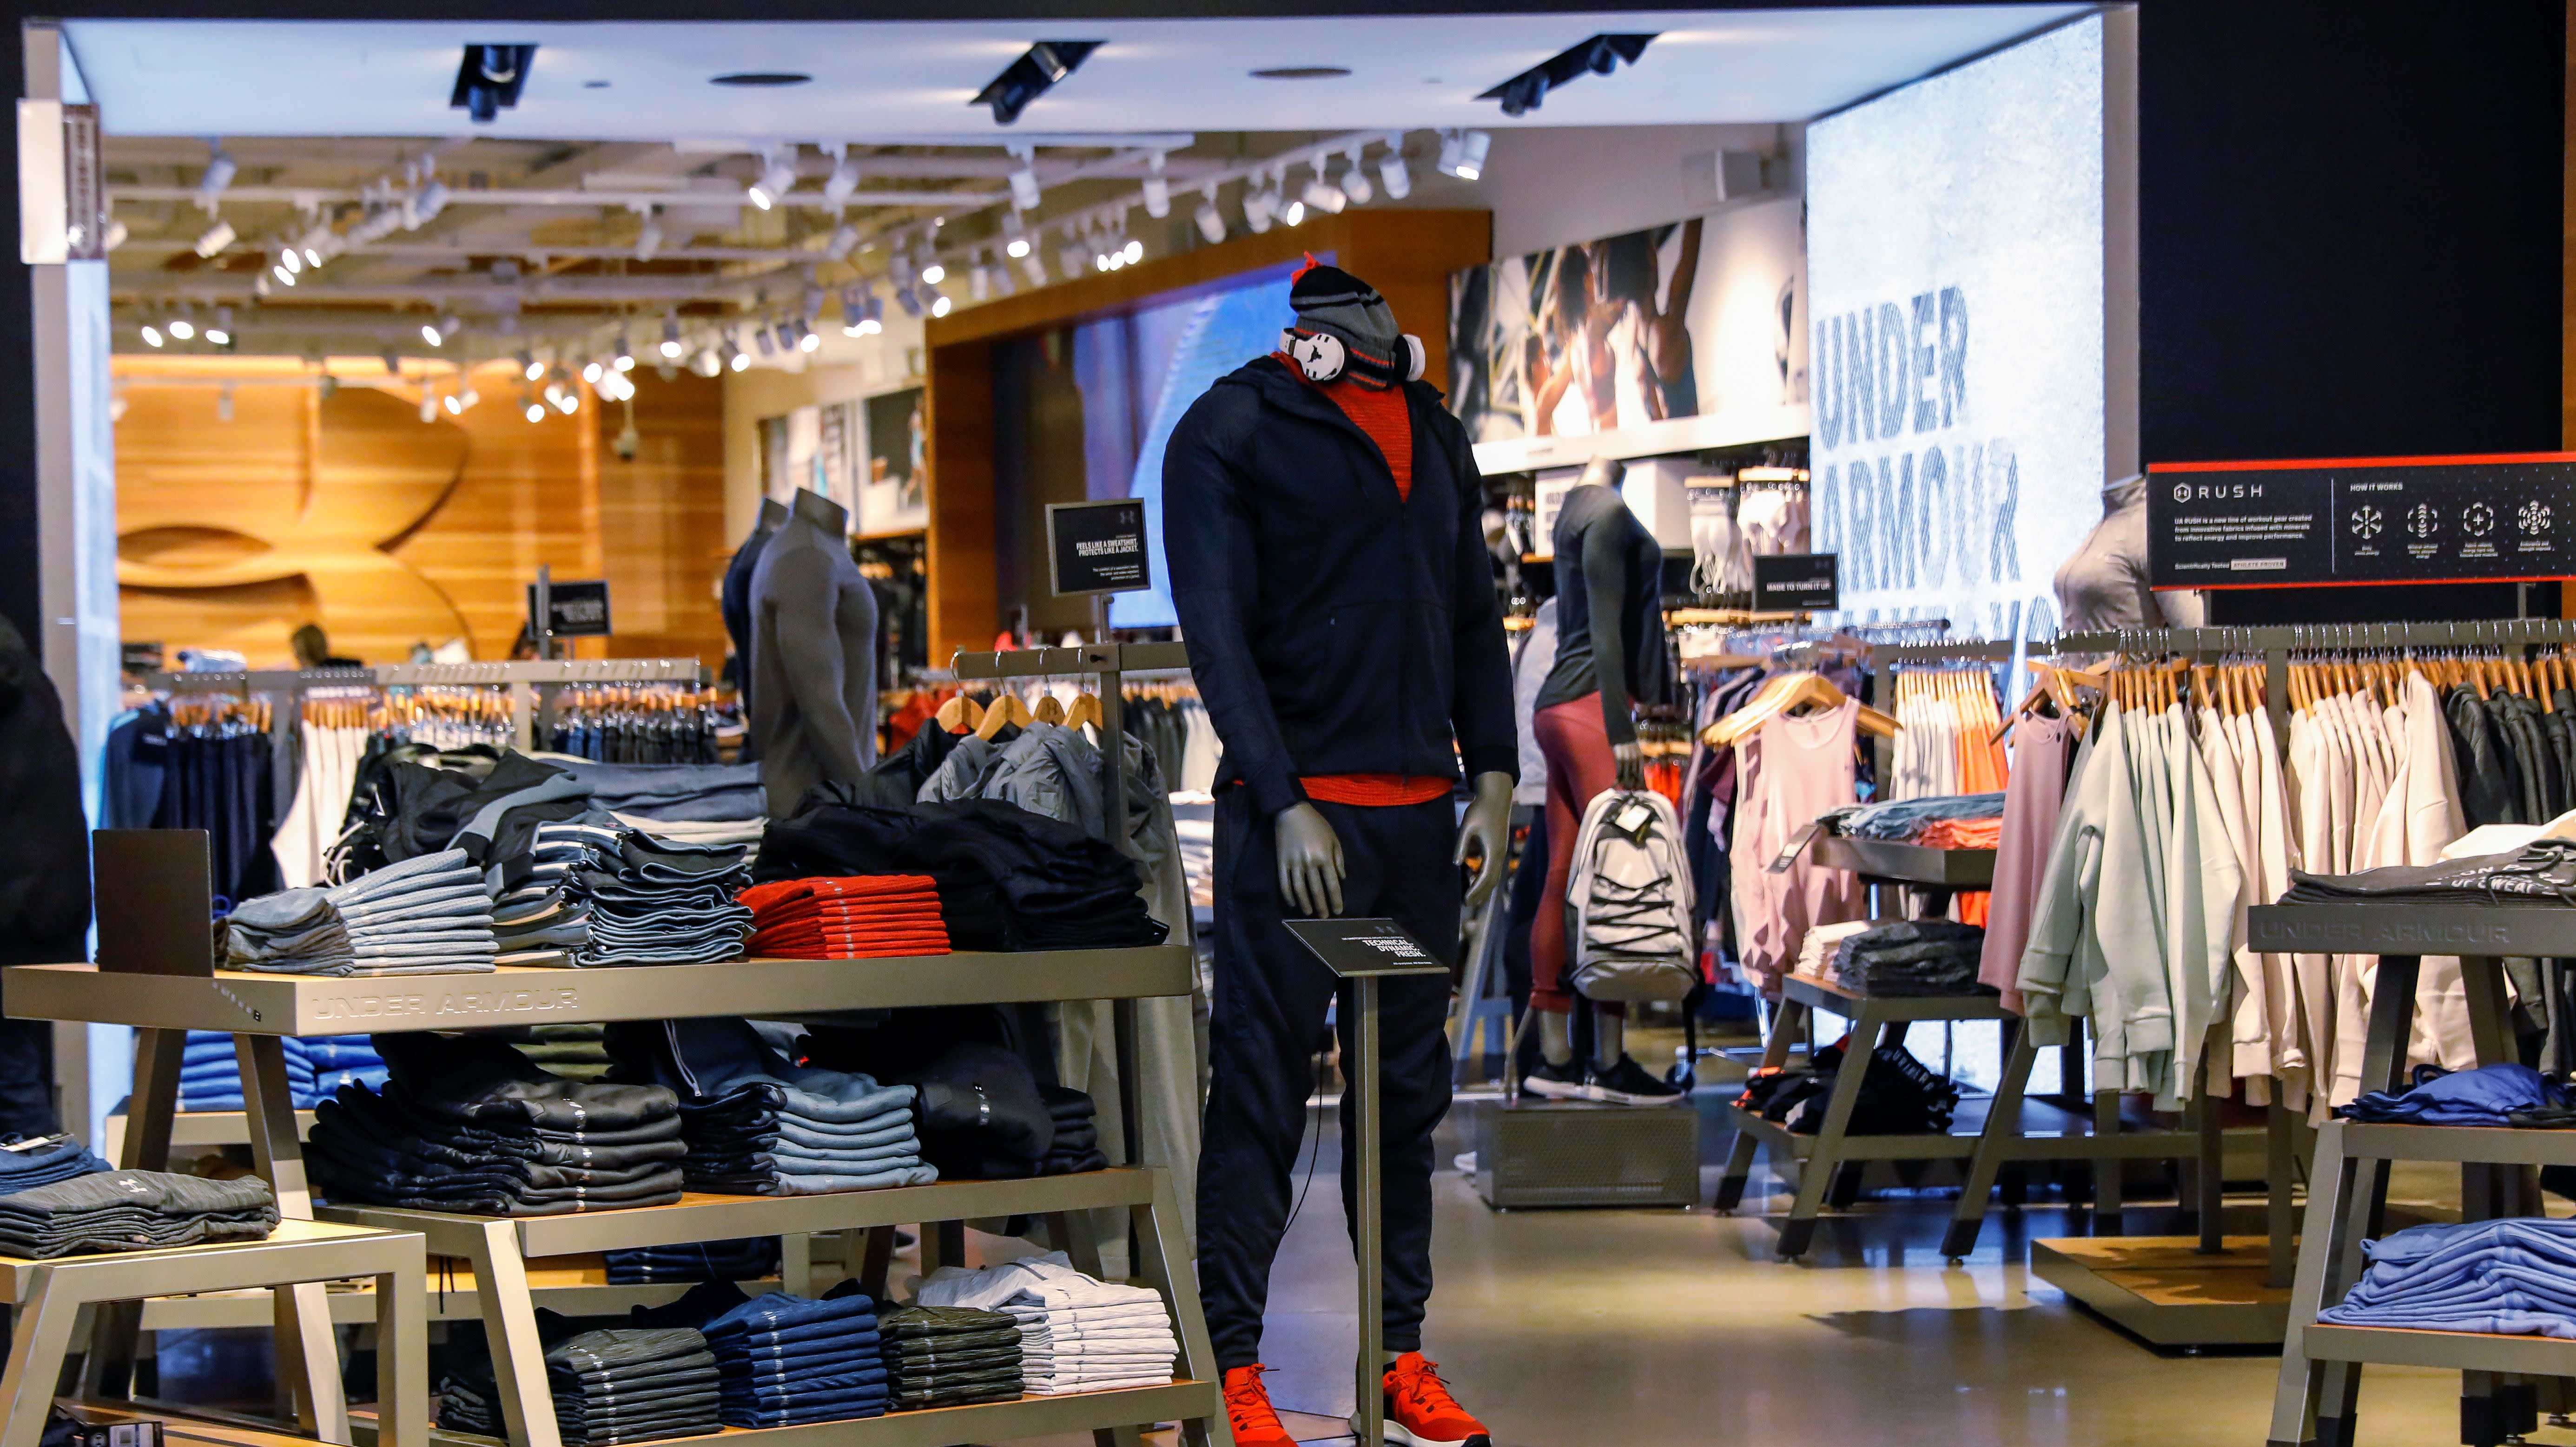 Analyst: Under Armour has 'peaked' in America